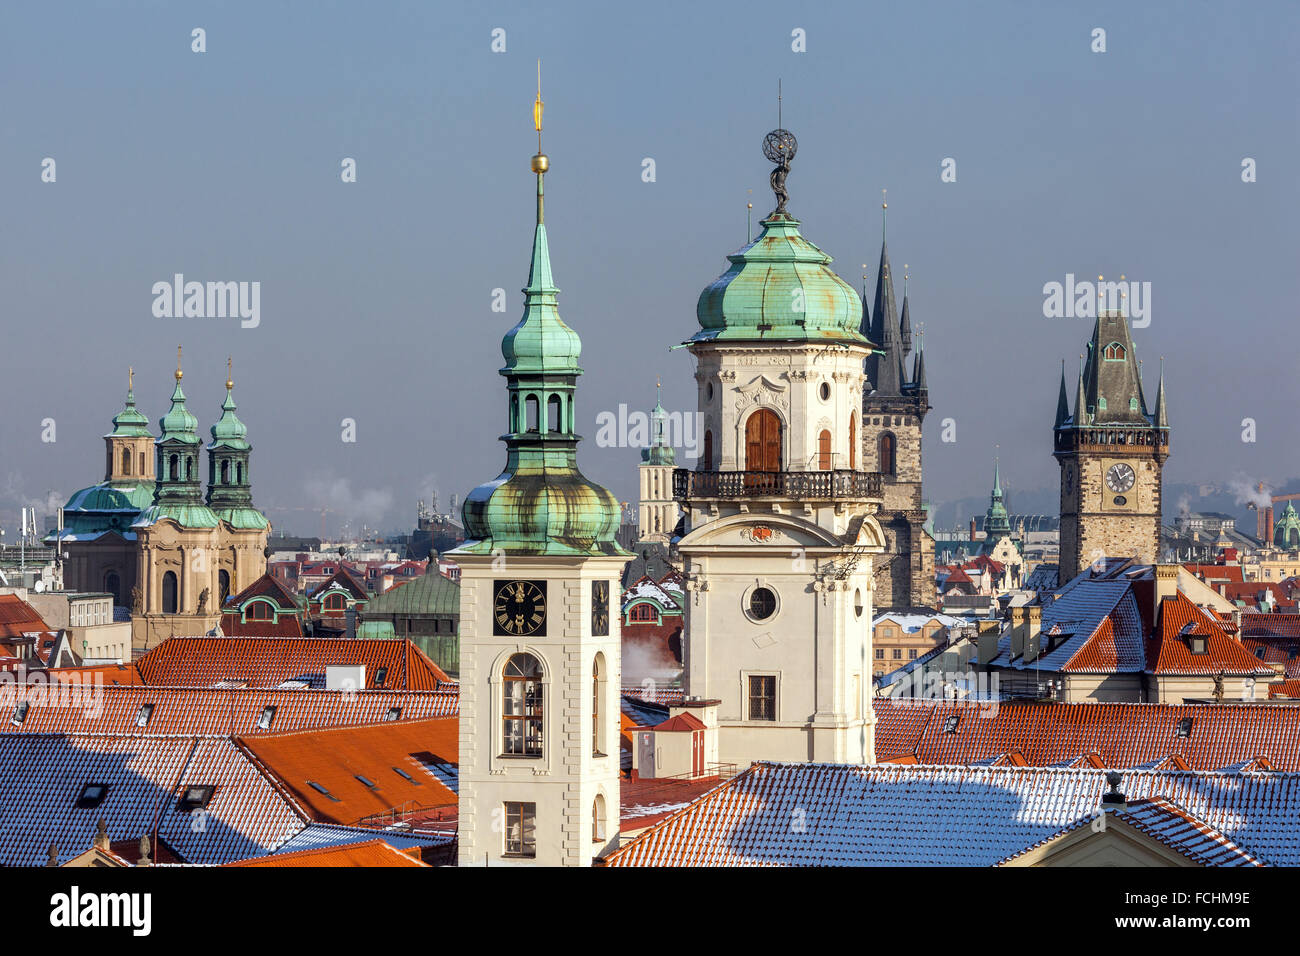 Towers and rooftops of Old Town, Prague Clementinum towers Czech Republic Stock Photo